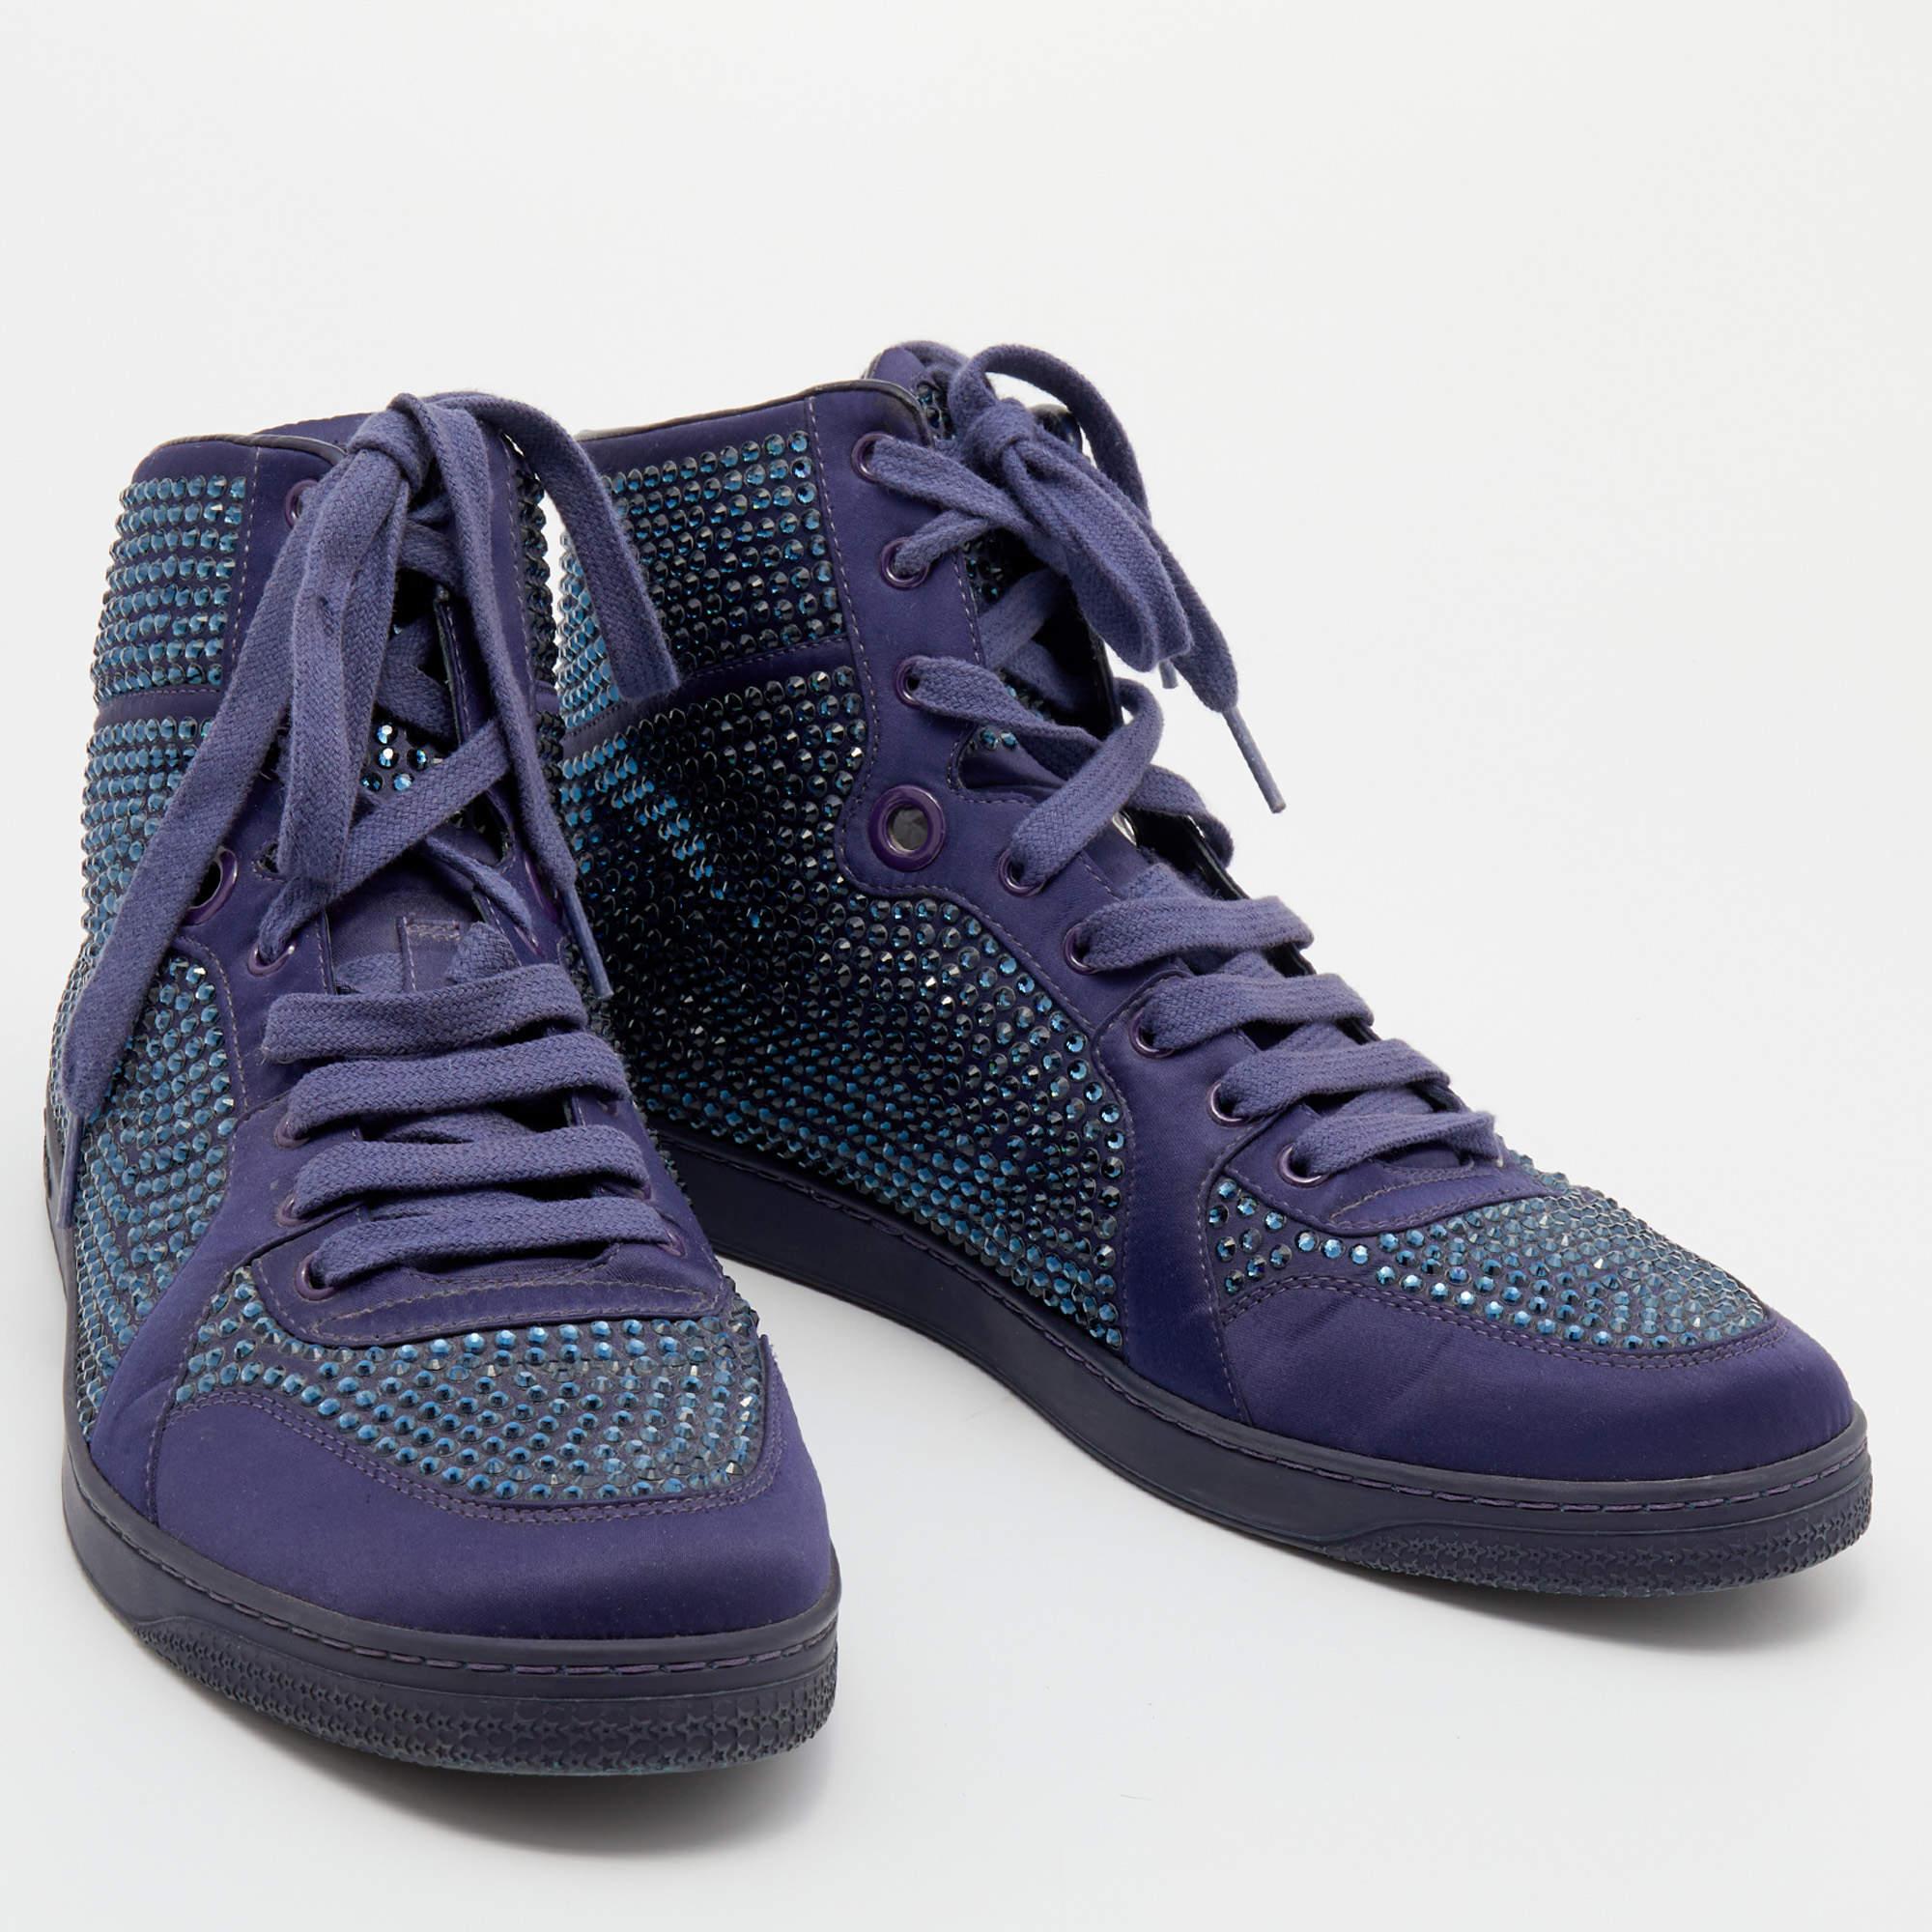 Gucci Purple Crystal Embellished Satin And Leather High Top Sneakers Size 43.5 1